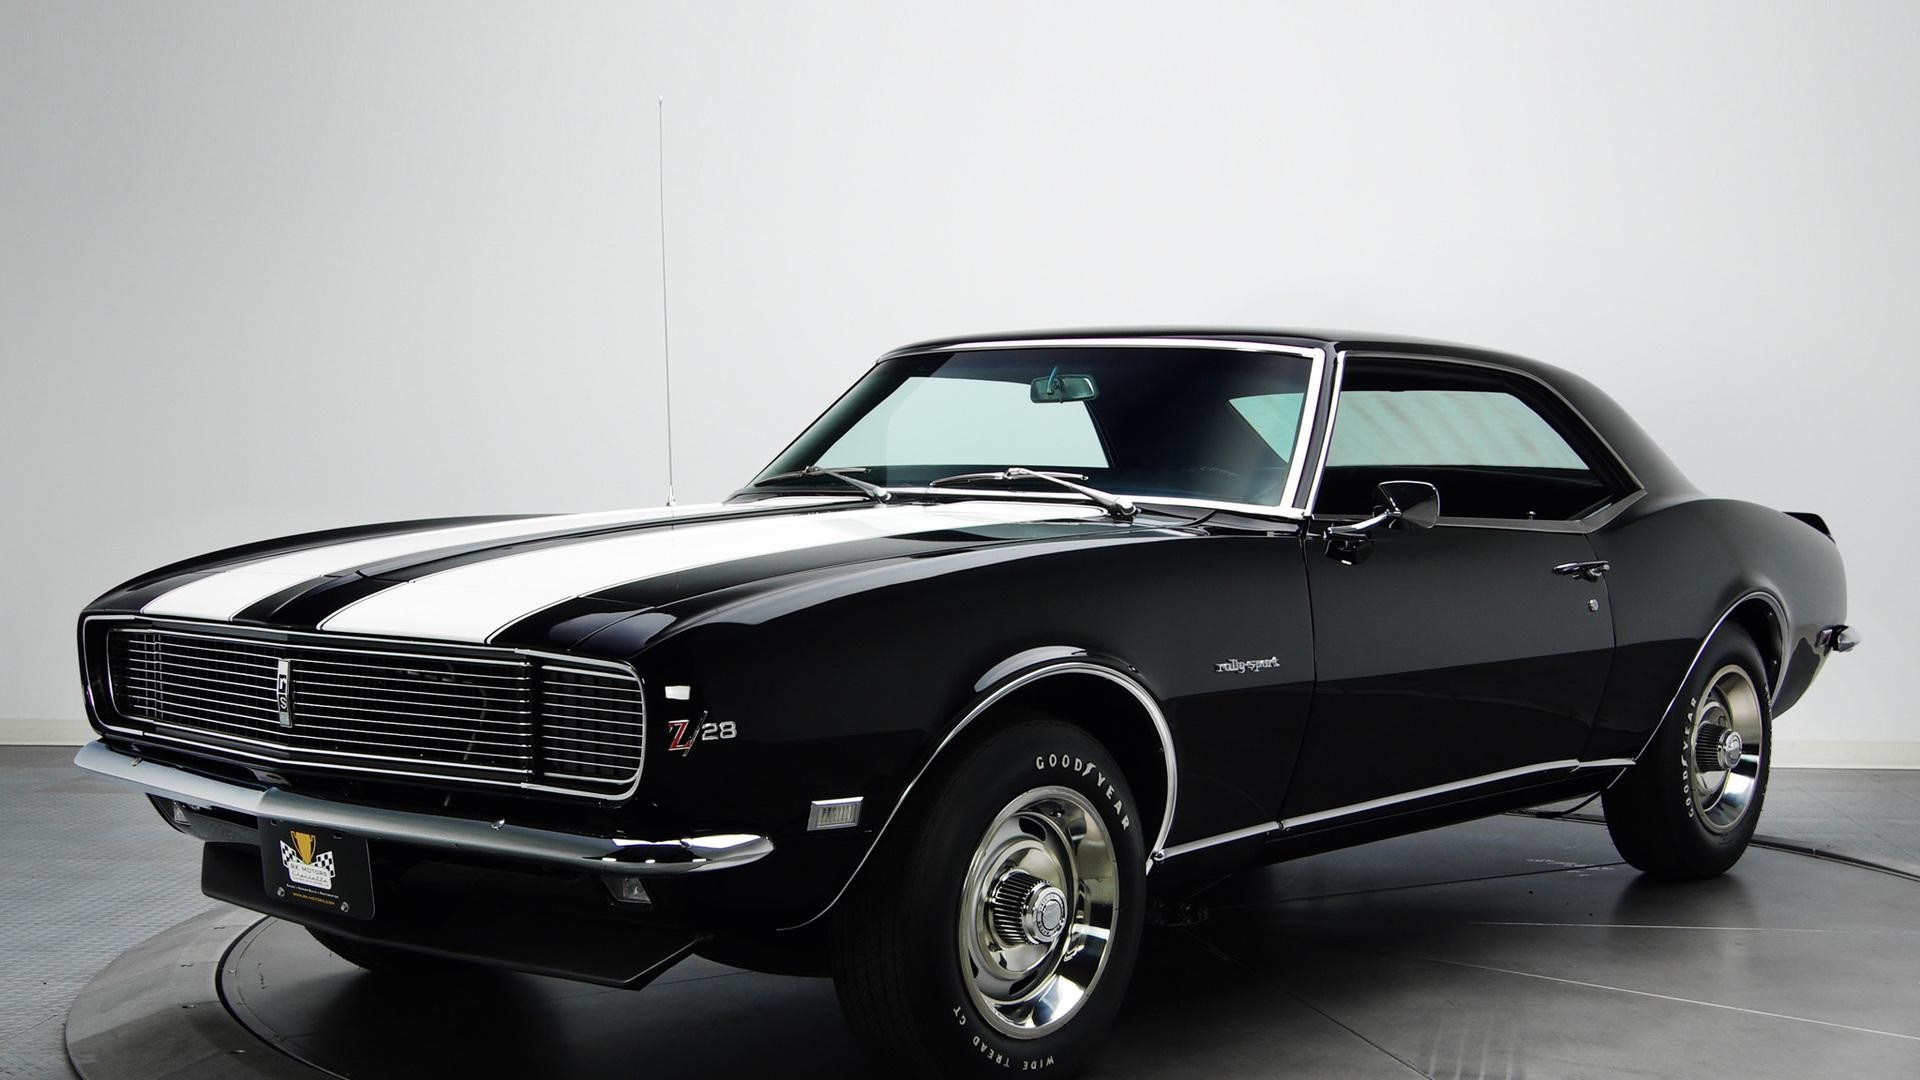 1920x1080 Amazing 1969 Chevrolet Camaro Z28 Hd Car Picture Images Â« Pin HD Wallpapers